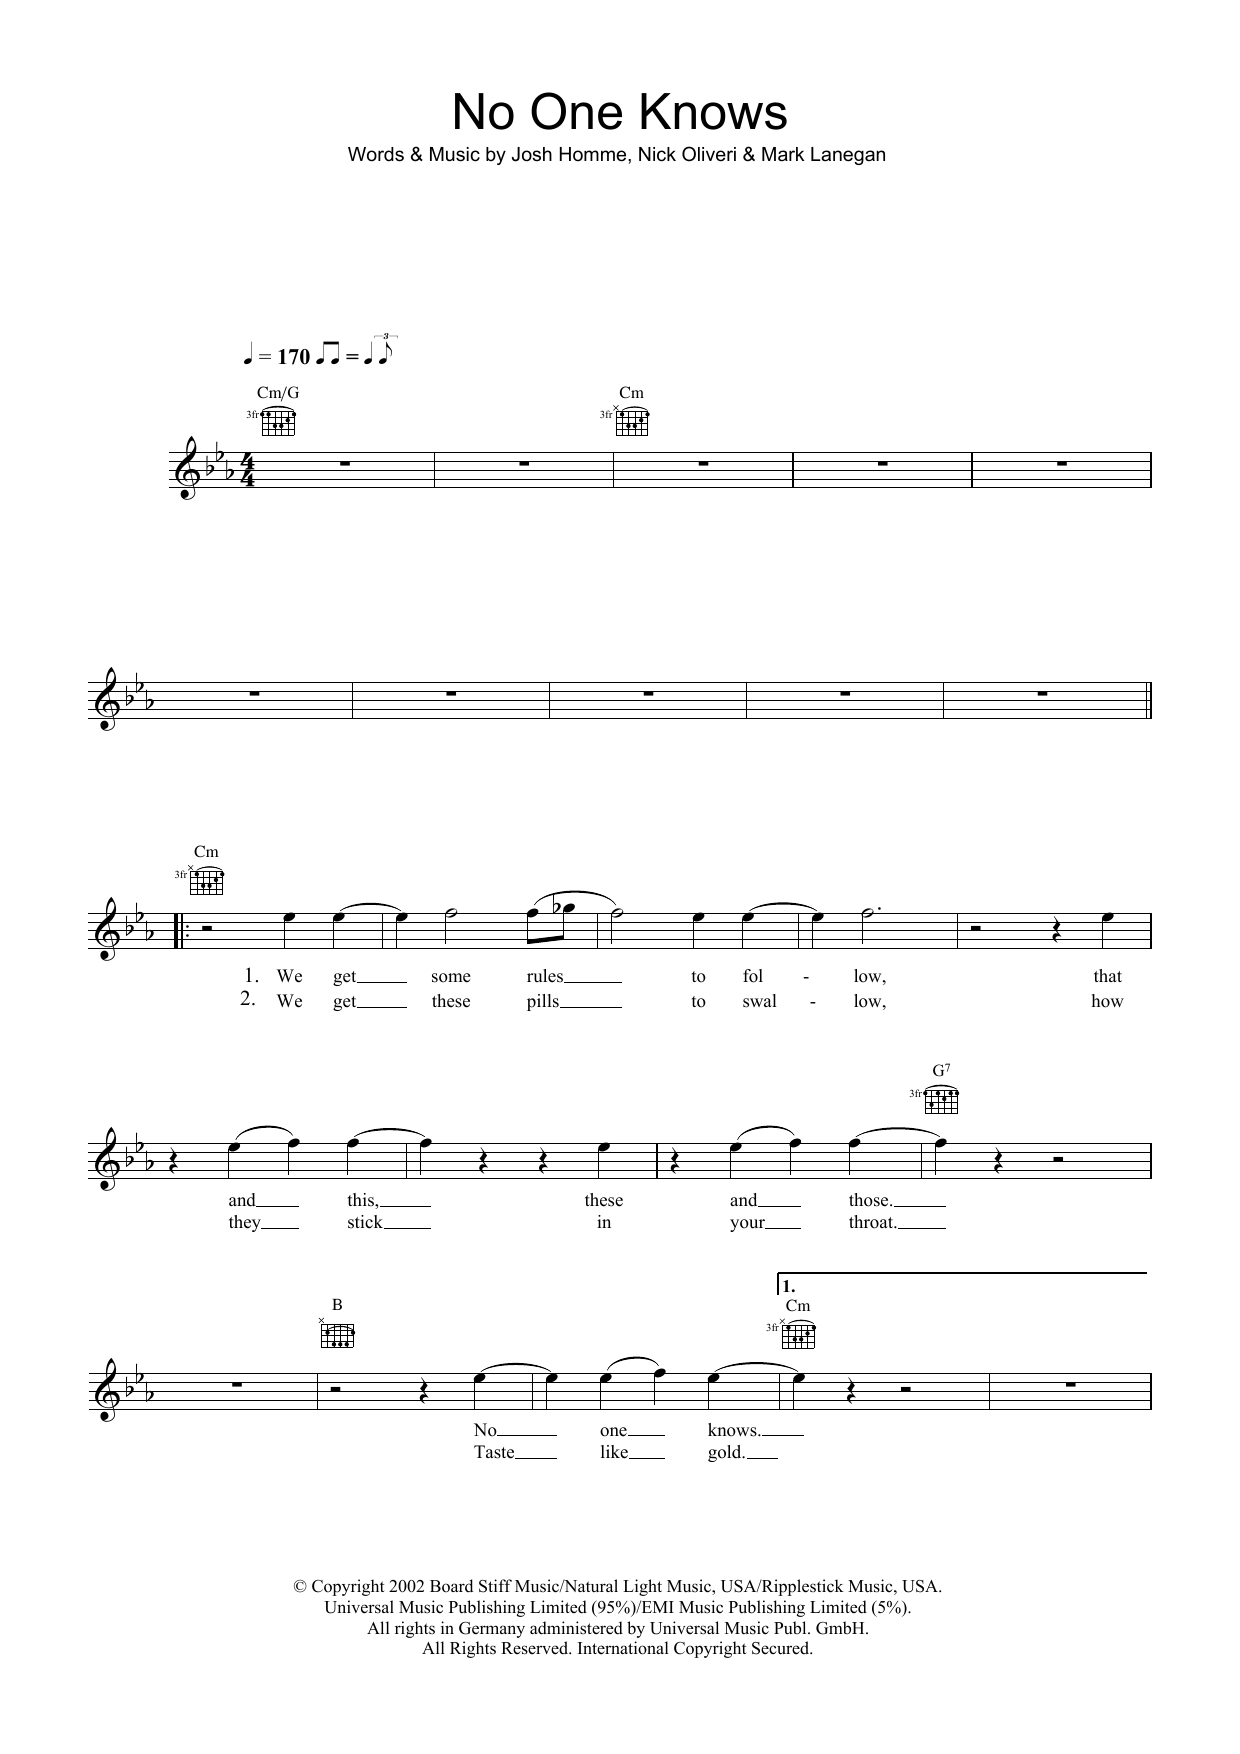 Download Queens Of The Stone Age No One Knows Sheet Music